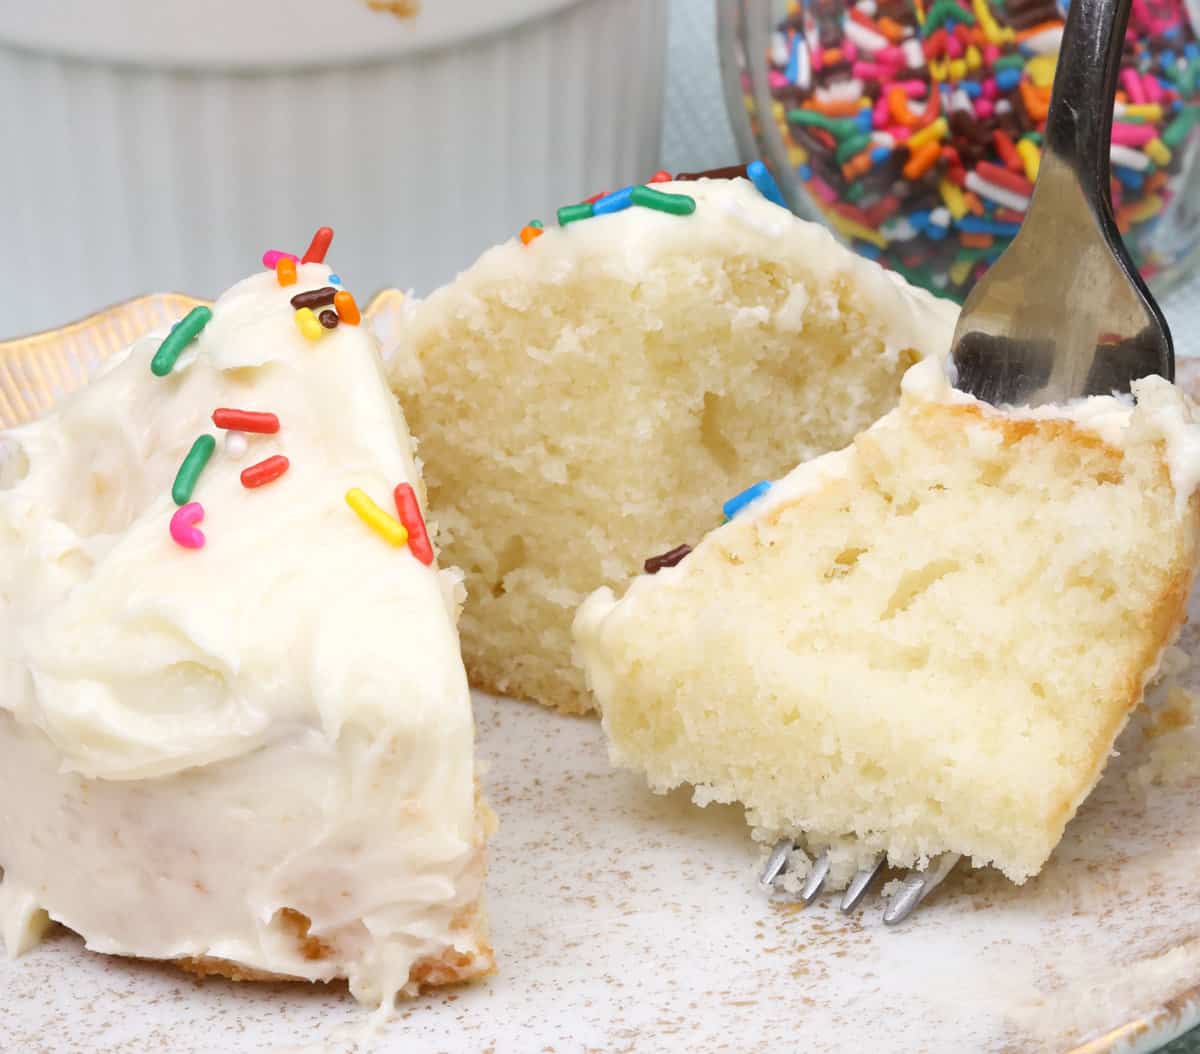 a slice of white cake with the fork on the side and a jar of sprinkles in the background.